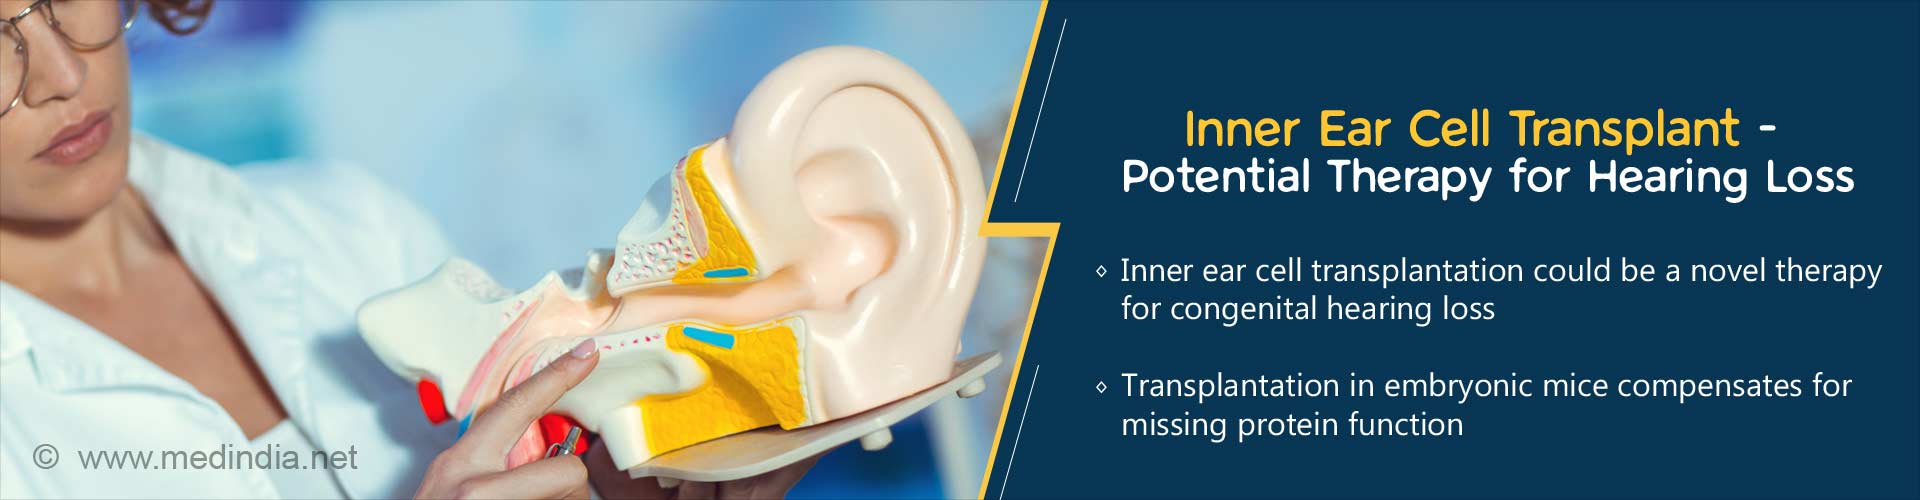 inner ear cell transplant - potential therapy for hearing loss
- inner ear cell transplantation could be a novel therapy for congenital hearing loss
- transplantation in embryonic mice compensates for missing protein function